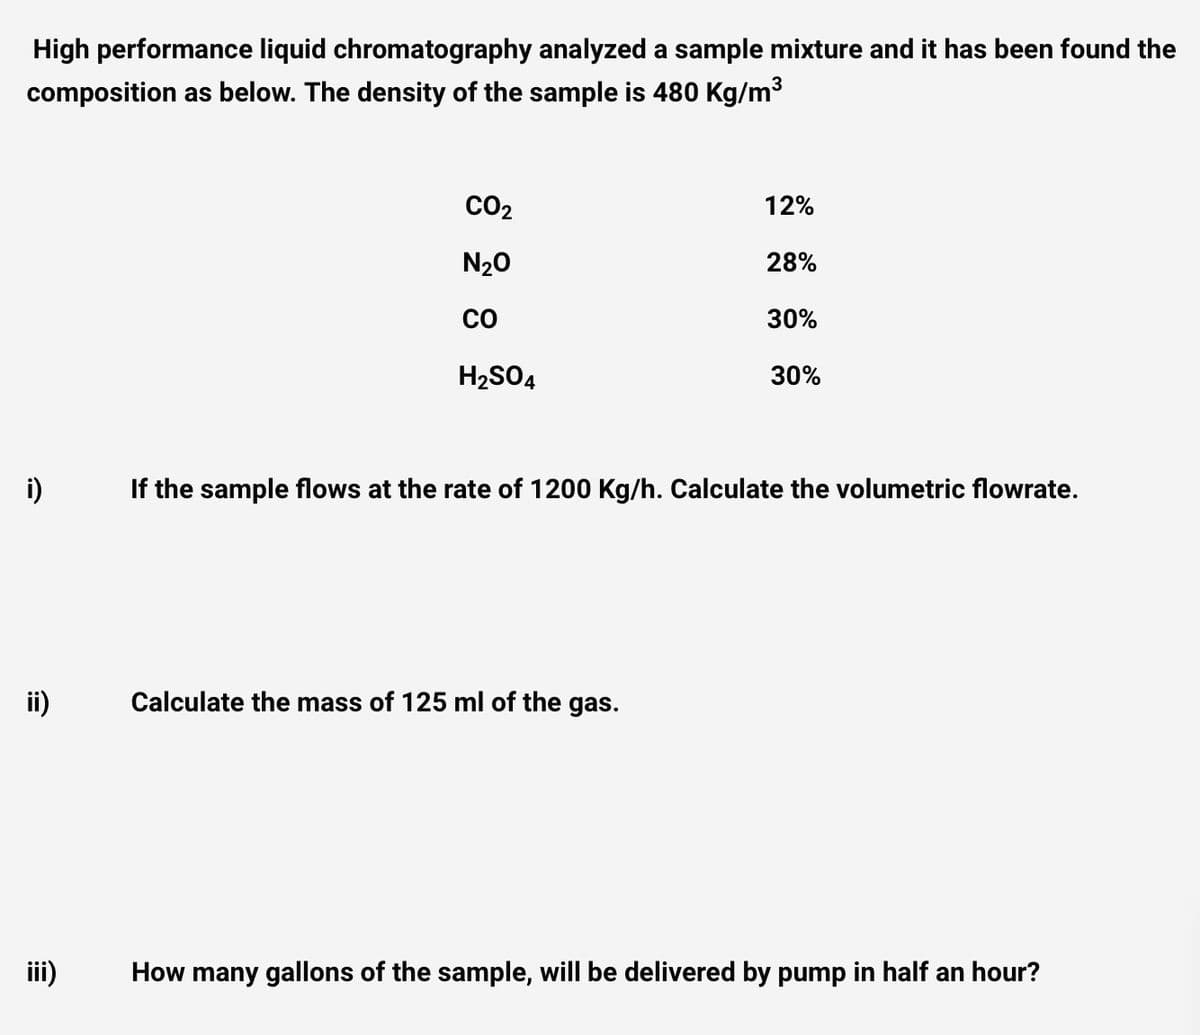 High performance liquid chromatography analyzed a sample mixture and it has been found the
composition as below. The density of the sample is 480 Kg/m3
CO2
12%
N20
28%
co
30%
H2SO4
30%
i)
If the sample flows at the rate of 1200 Kg/h. Calculate the volumetric flowrate.
ii)
Calculate the mass of 125 ml of the gas.
iii)
How many gallons of the sample, will be delivered by pump in half an hour?
